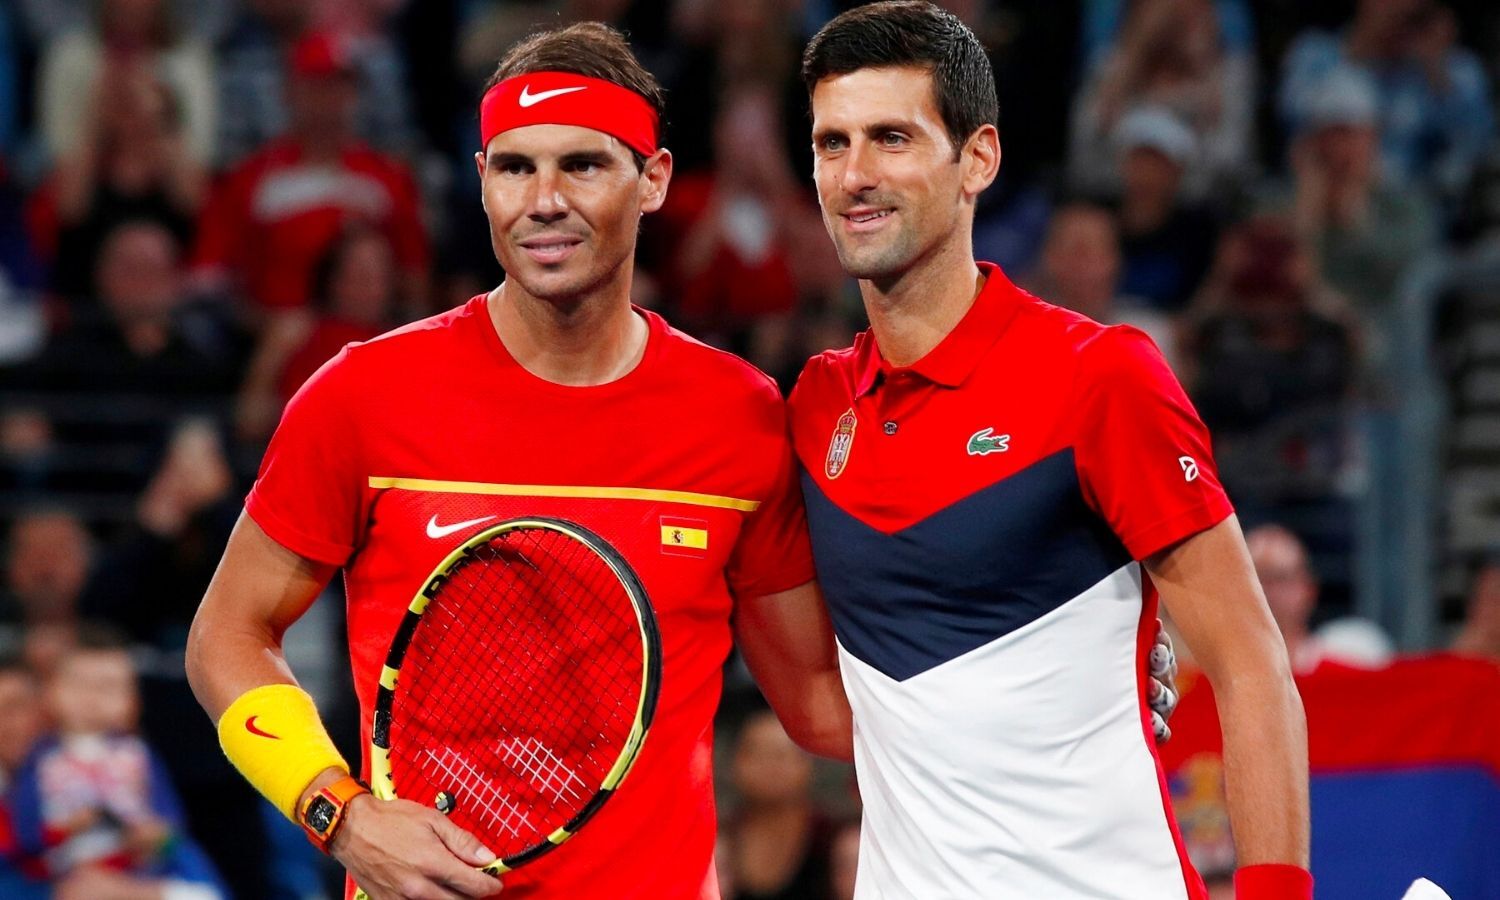 French Open 2022 Djokovic vs Nadal in blockbuster quarterfinal — Preview, Where to watch, Live Stream details